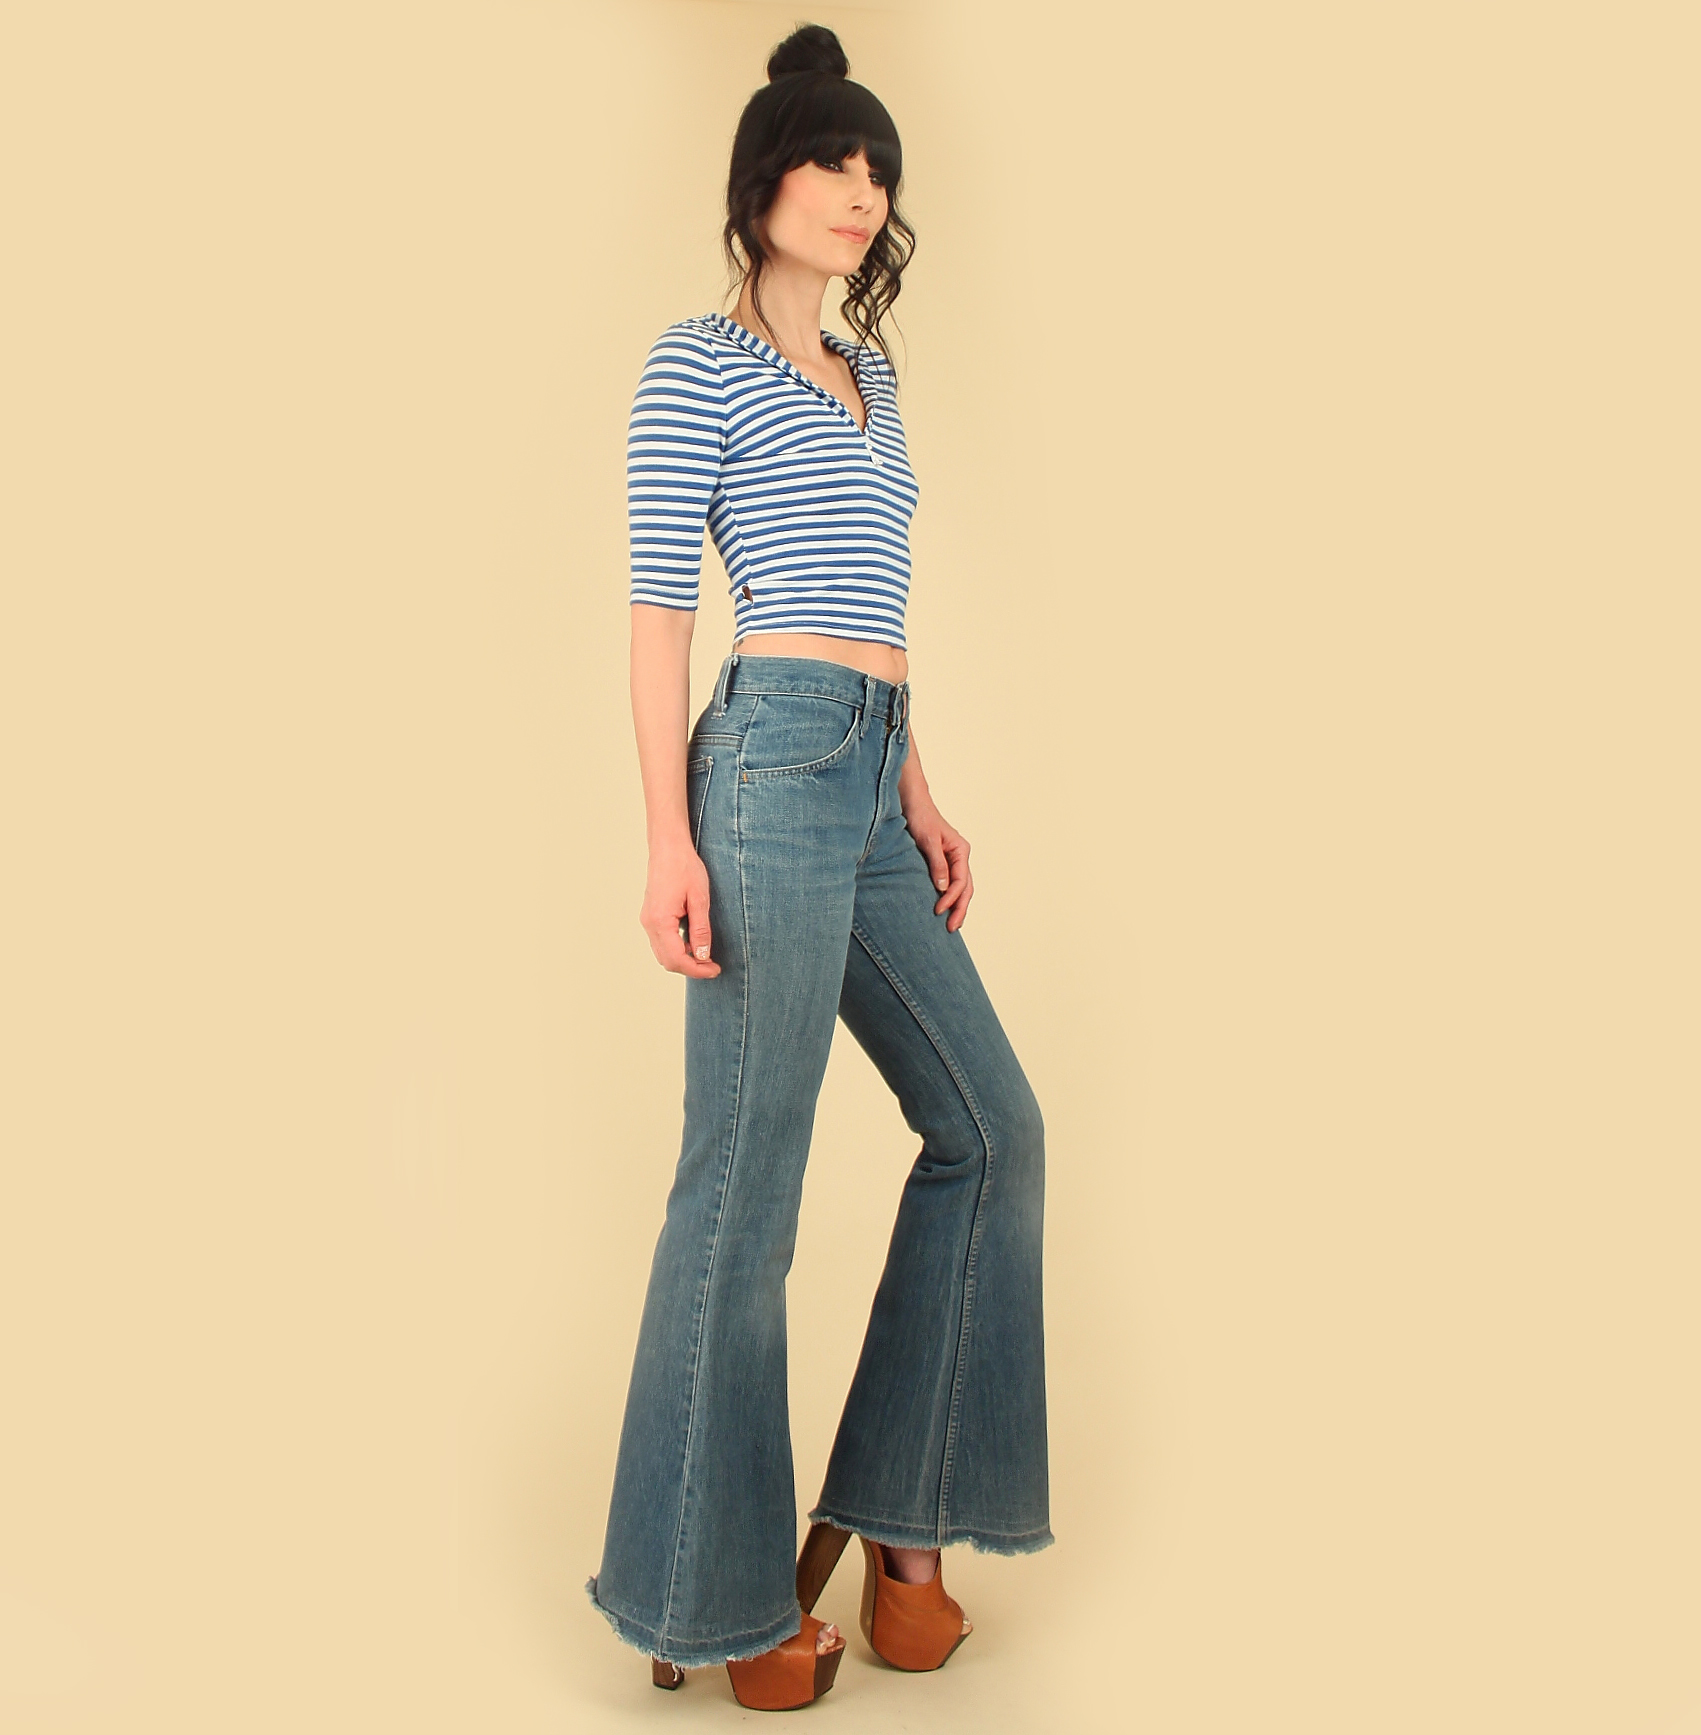 70s style bell bottom jeans